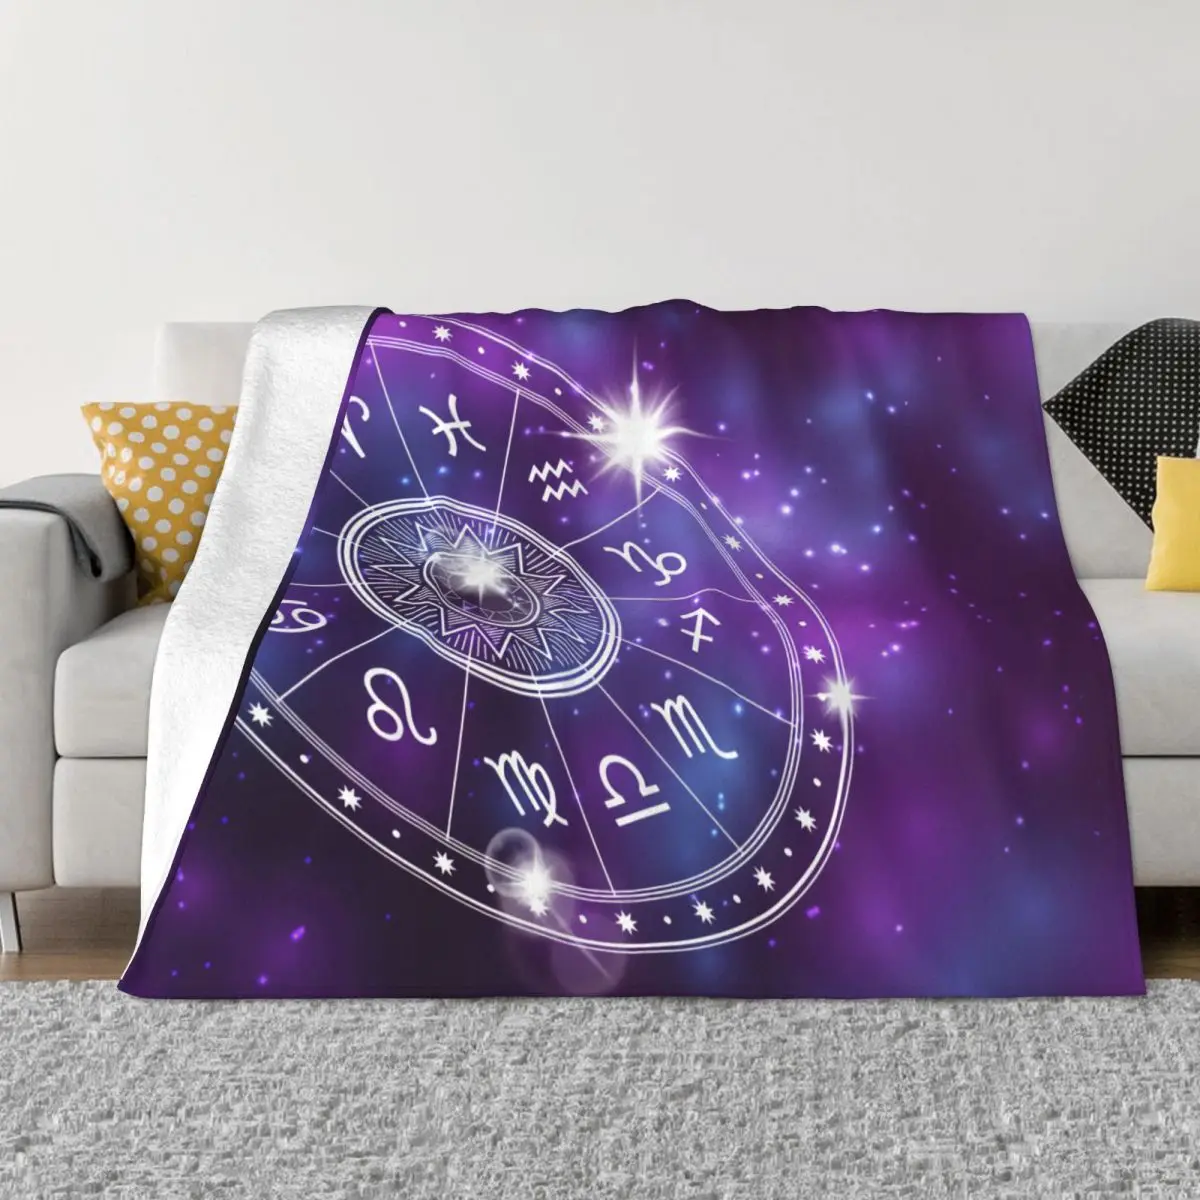 

Horoscope Mystical Tarot Cards Blanket Lightweight Breathable Decorative Bed Throw Blankets for Luxury Bedding Travel Camping